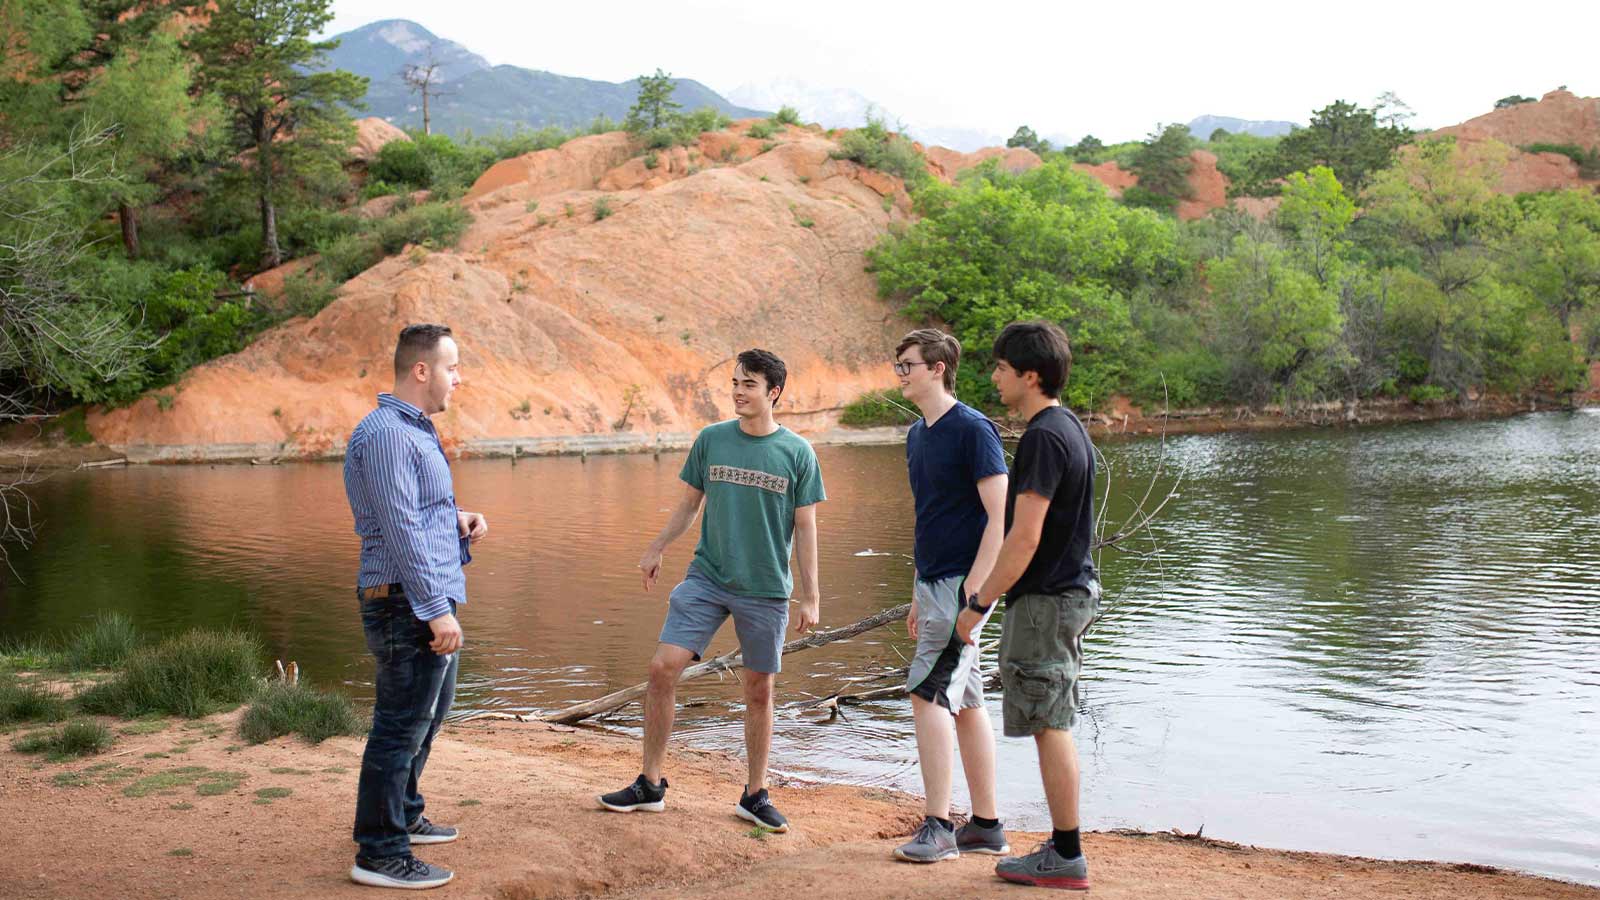 Four individuals standing by a lakeside, surrounded by natural red rock formations and greenery.